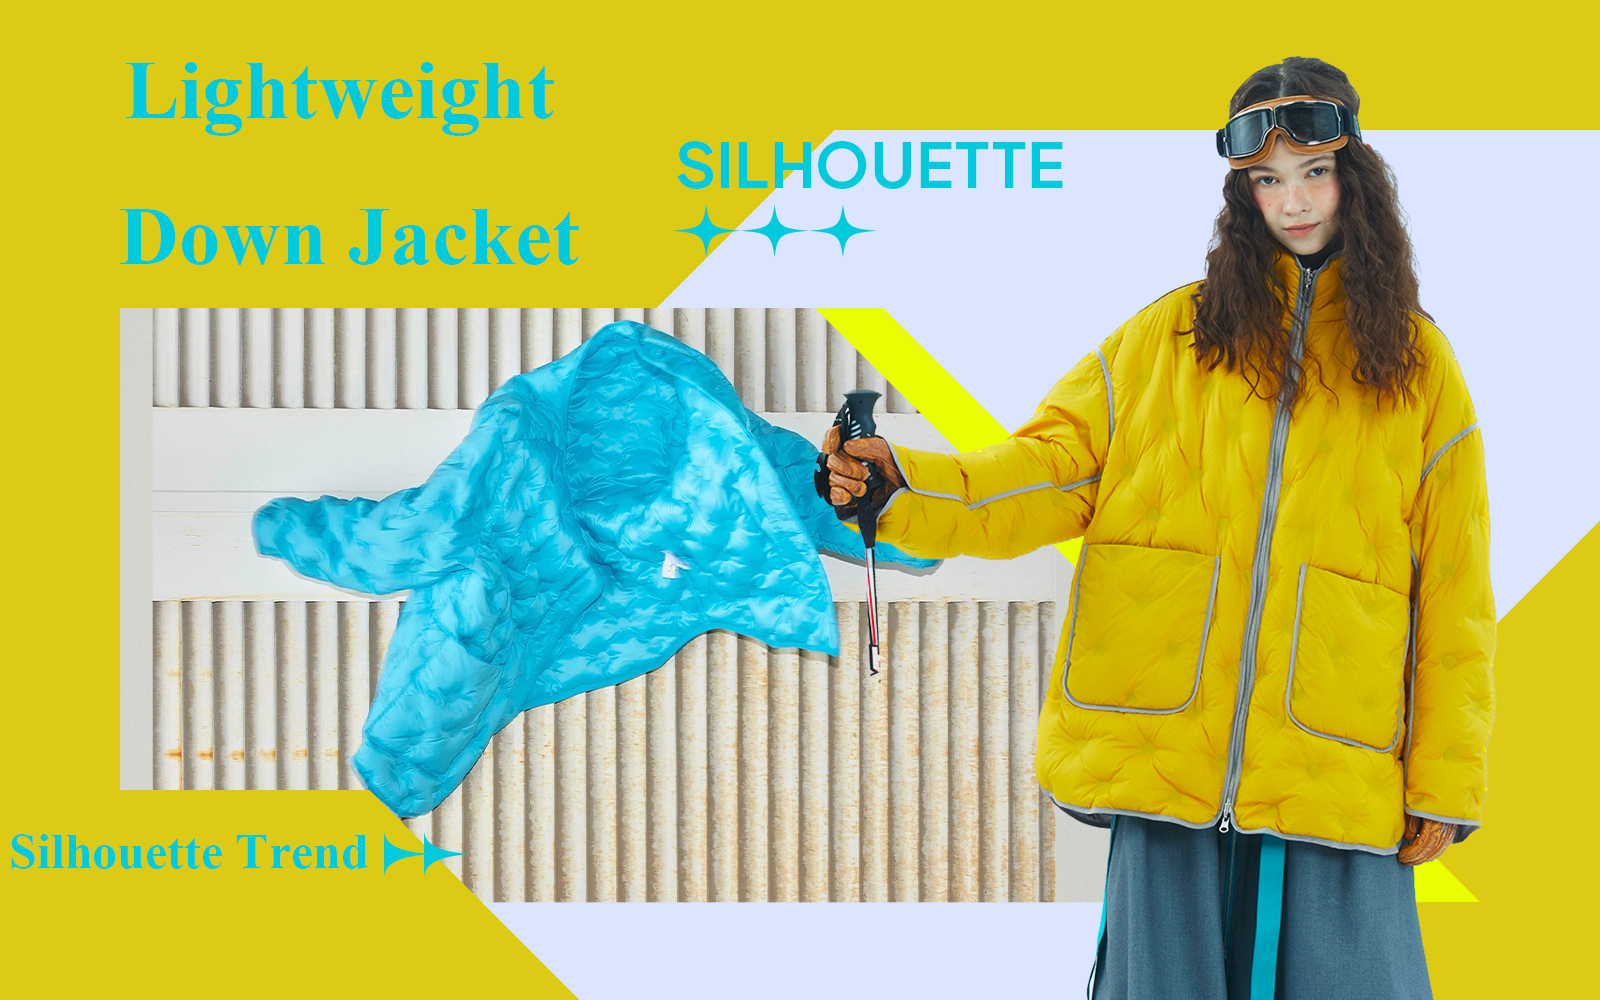 The Silhouette Trend for Lightweight Down Jacket